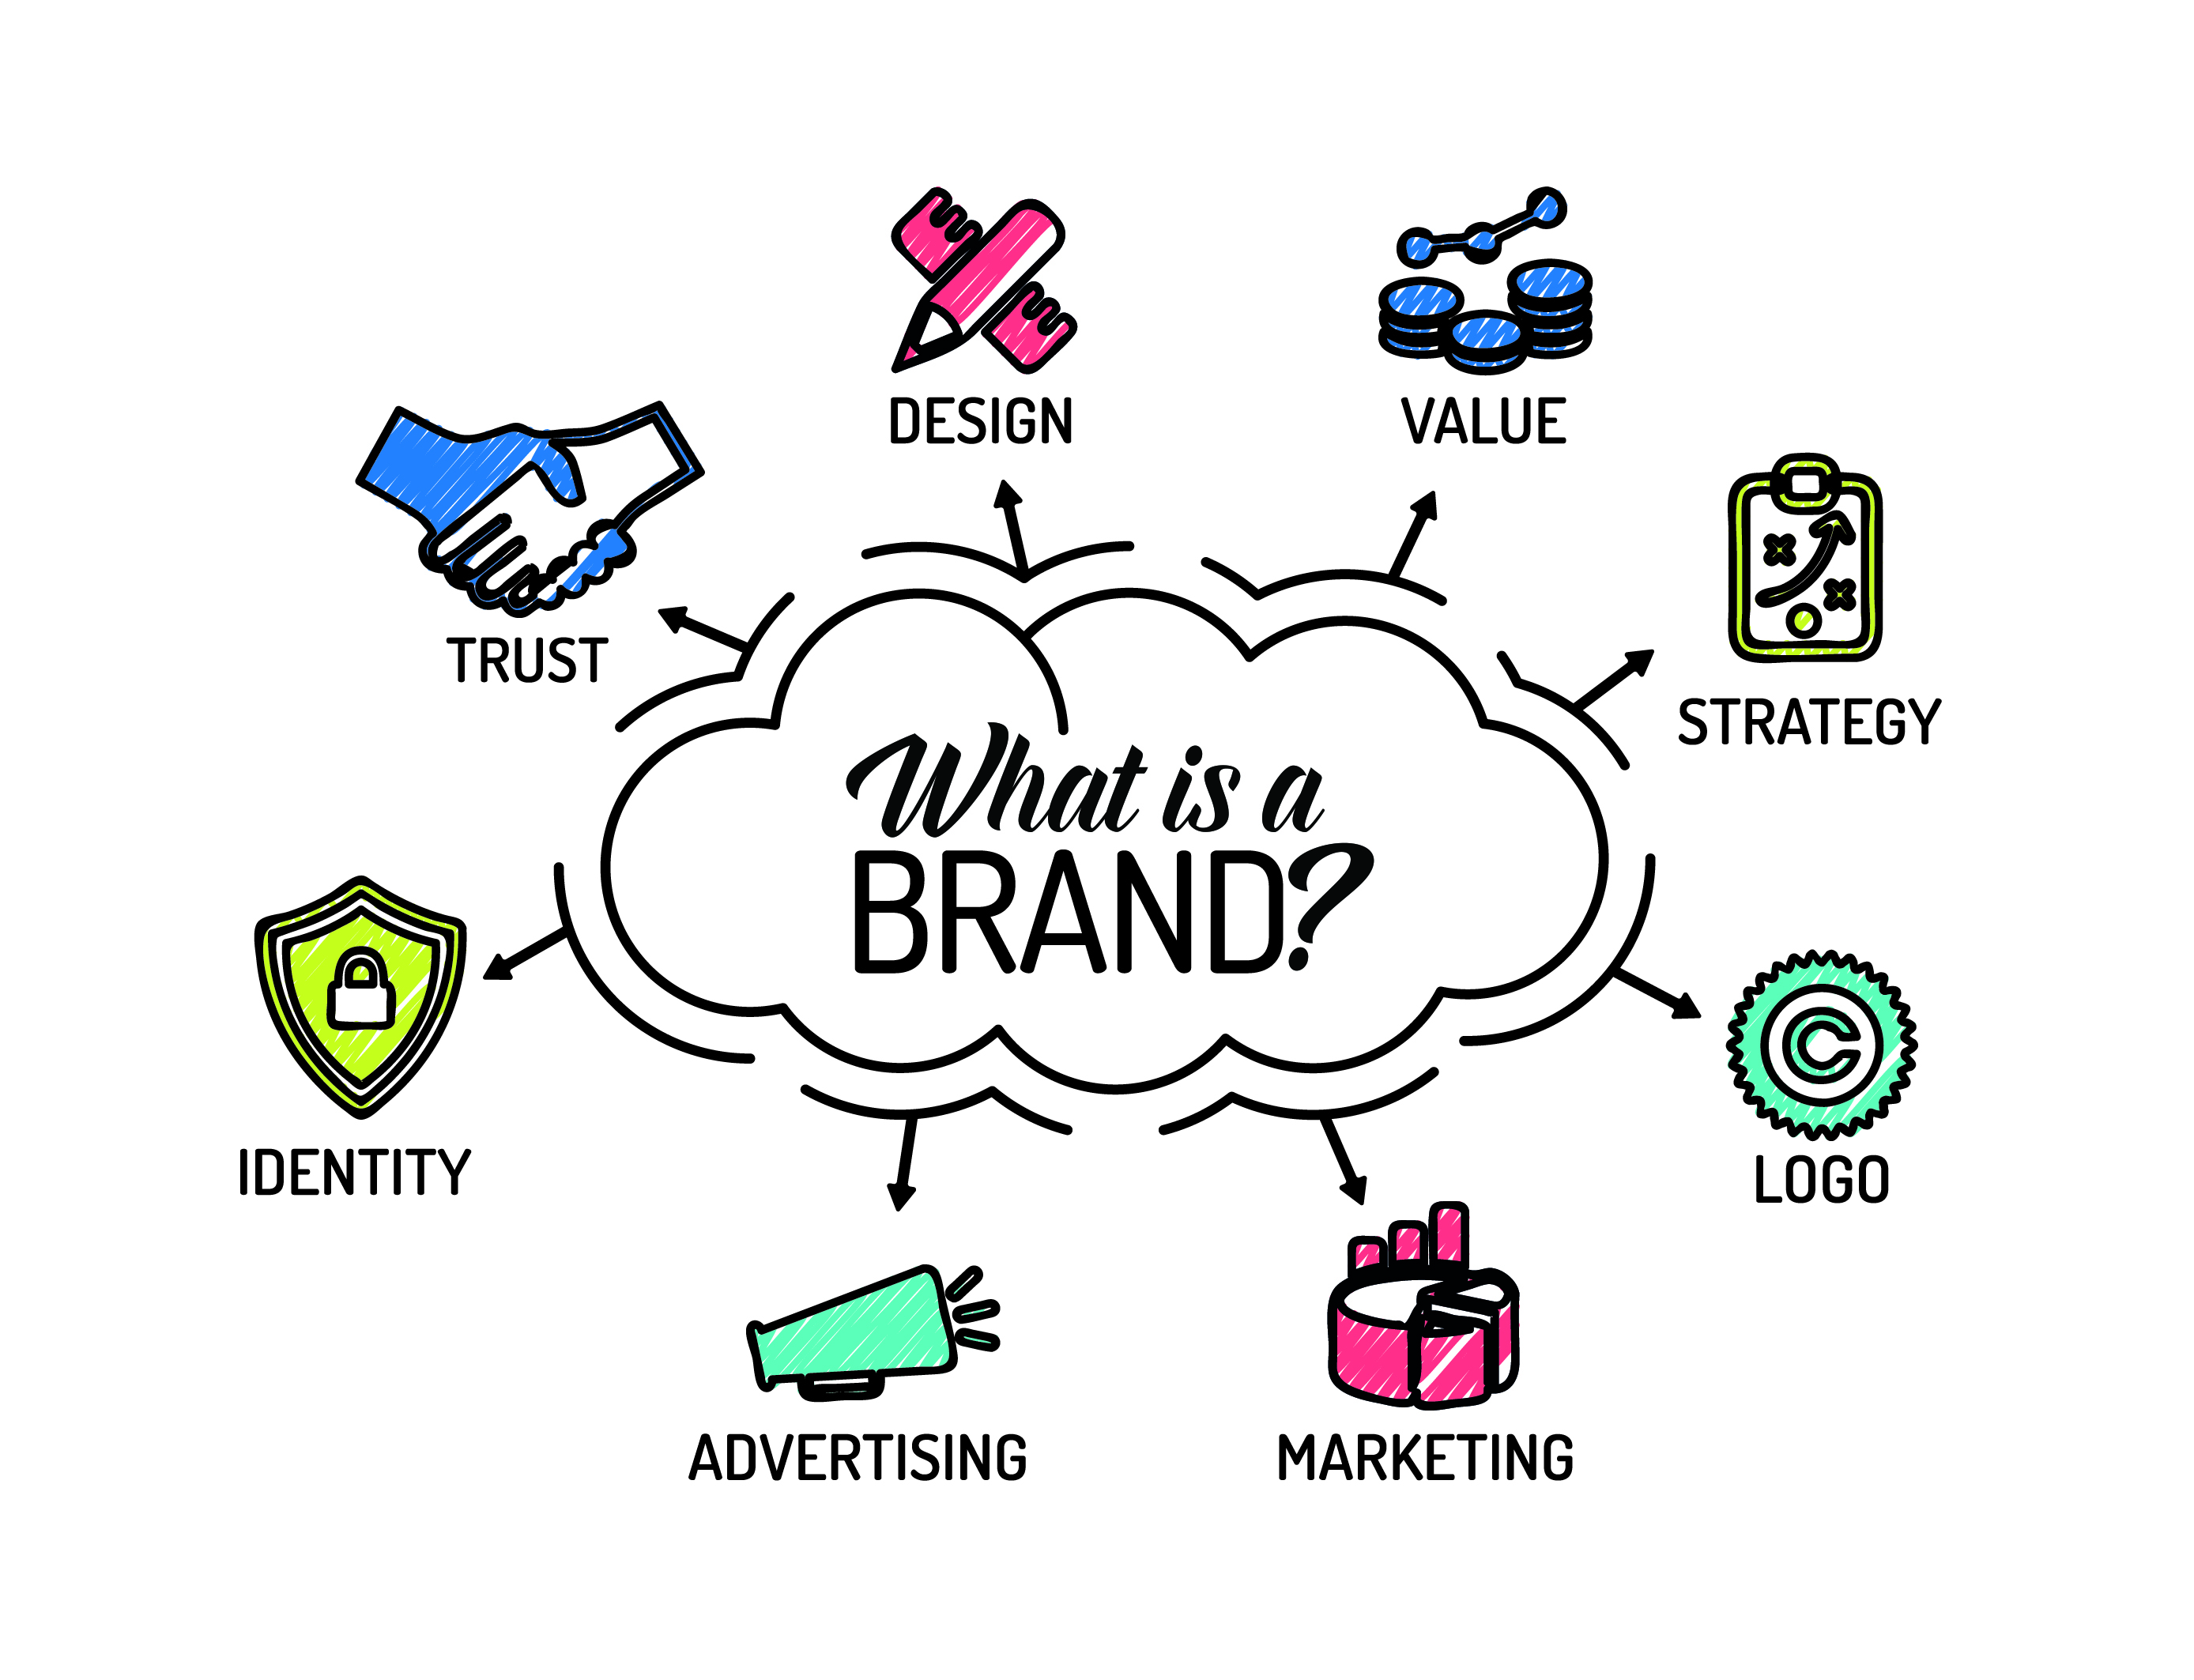 logo vs brand, what is the difference